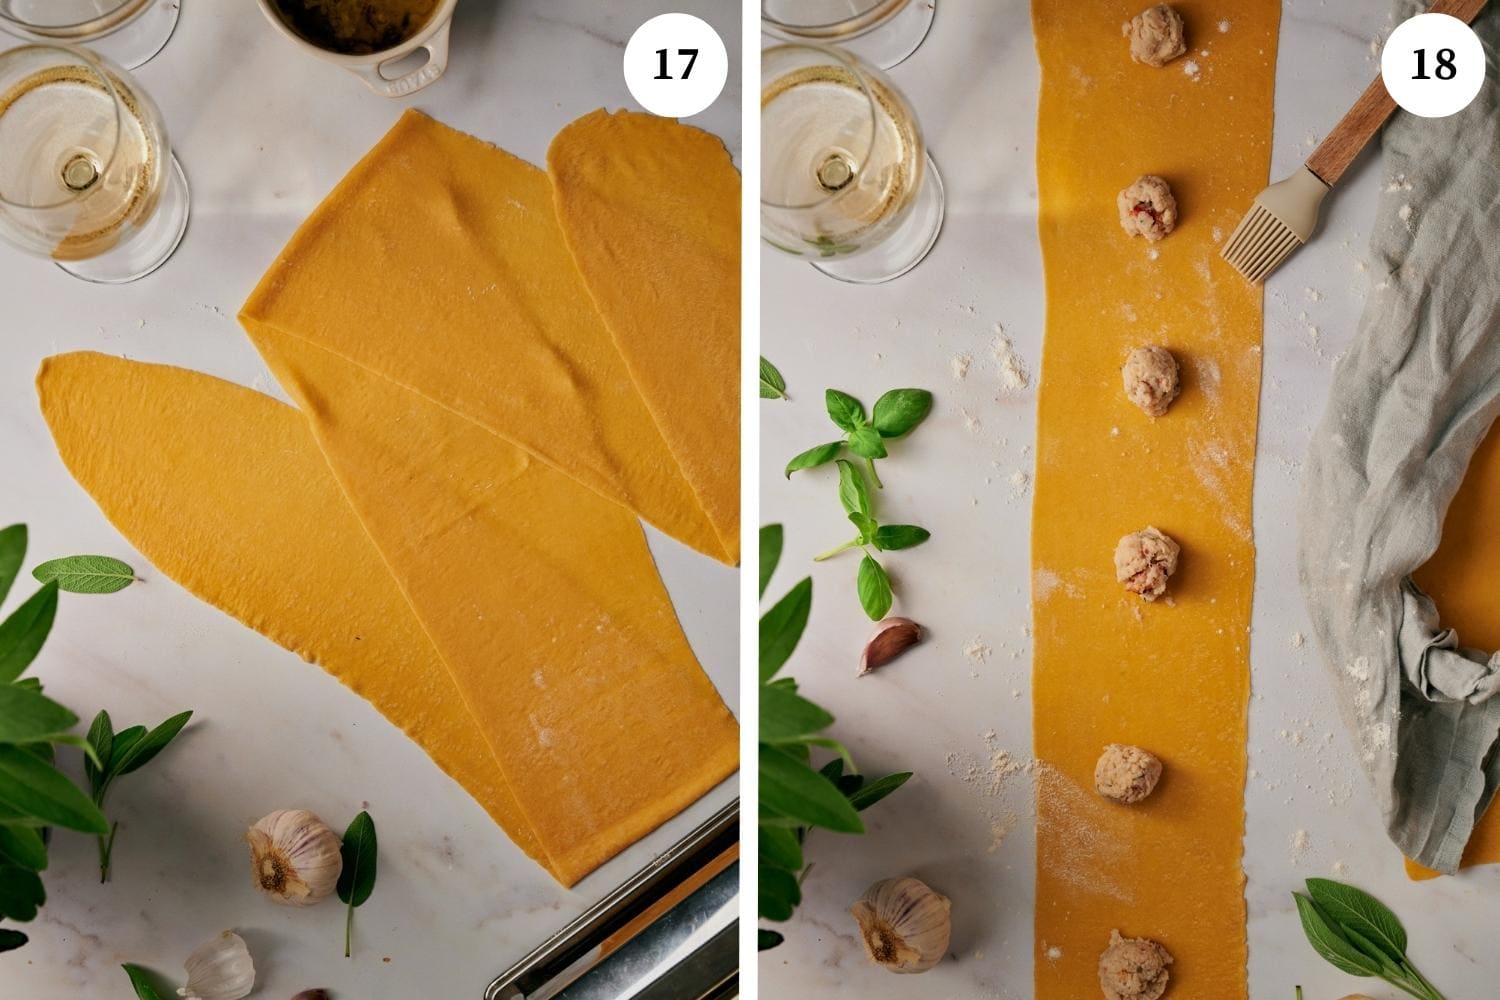 Process of making Lobster Ravioli: take one large strip of pasta and lay it out flat and put a heaping teaspoon of lobster ravioli filling every 3 inches.